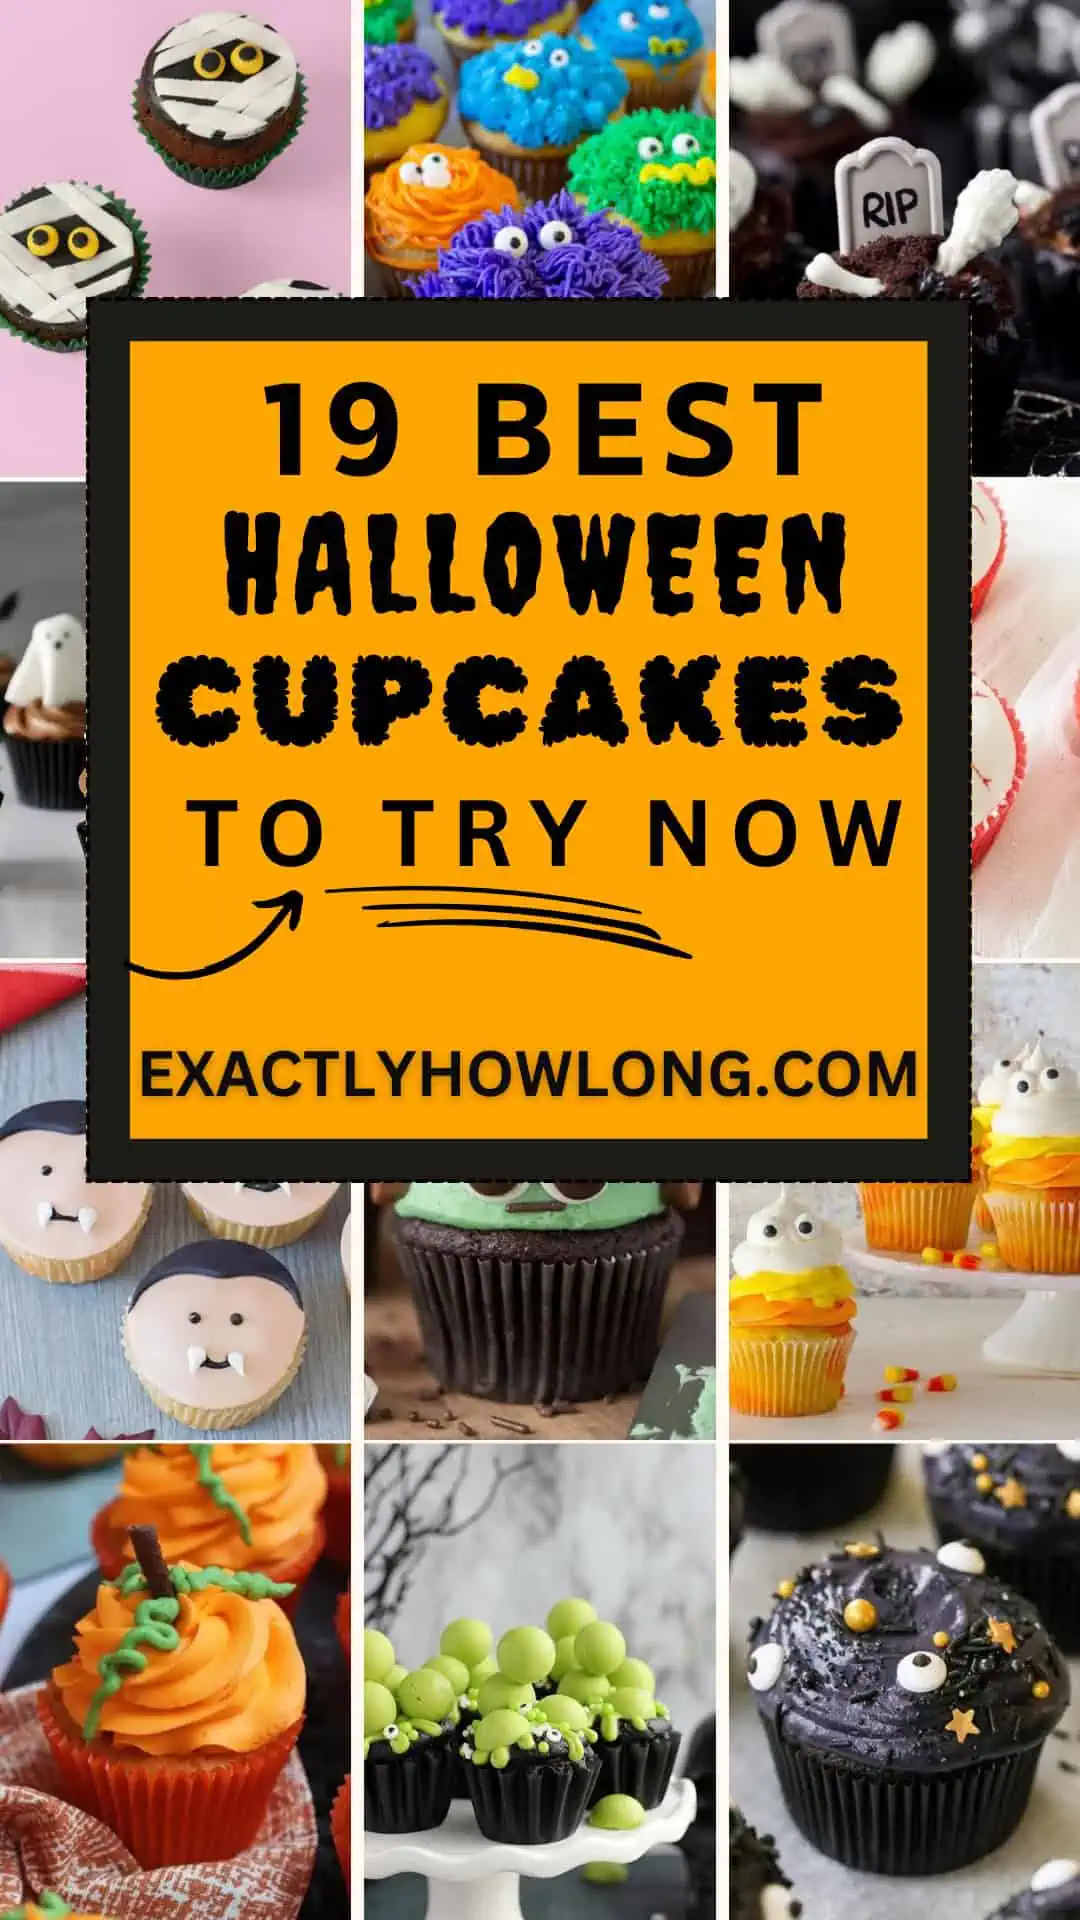 Simple and adorable Halloween cupcakes suitable for children's gatherings and parties.